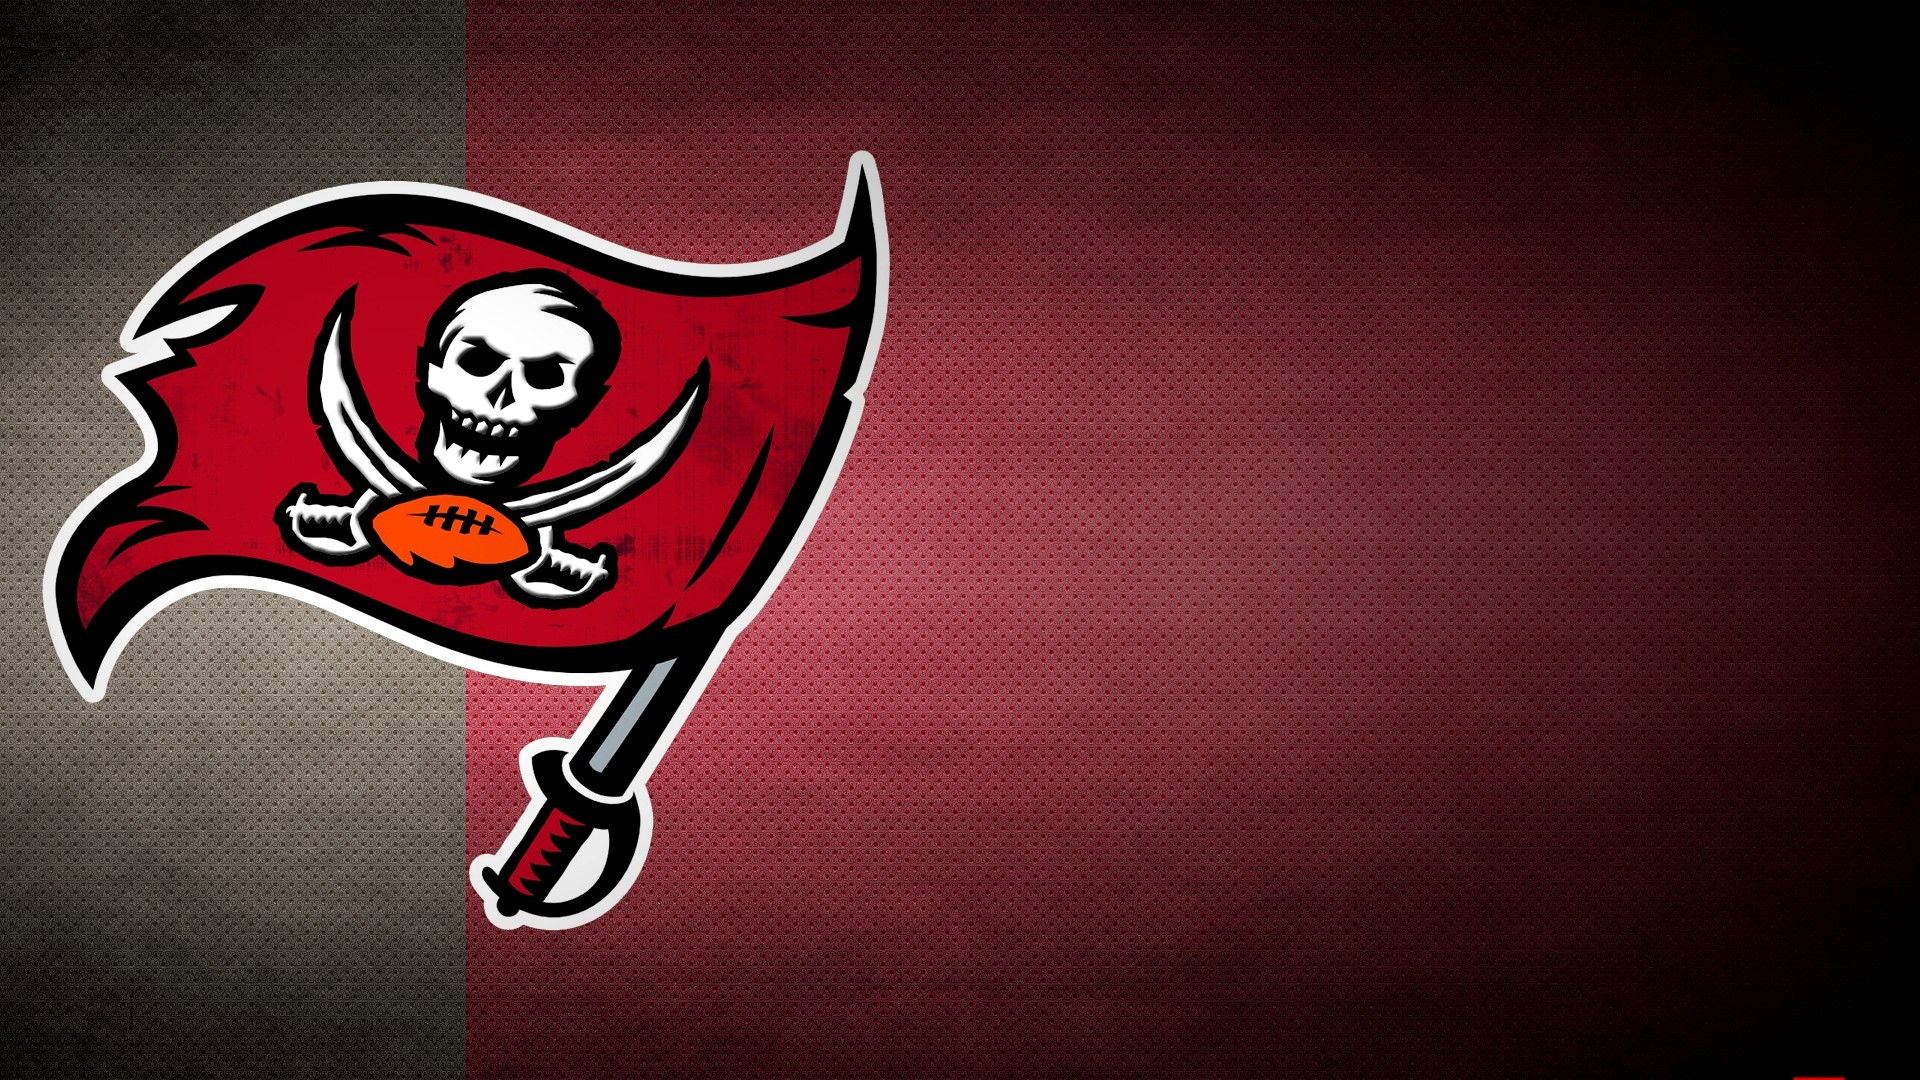 Tampa Bay Buccaneers Wallpaper HD Laptop with high-resolution 1920x1080 pixel. You can use and set as wallpaper for Notebook Screensavers, Mac Wallpapers, Mobile Home Screen, iPhone or Android Phones Lock Screen